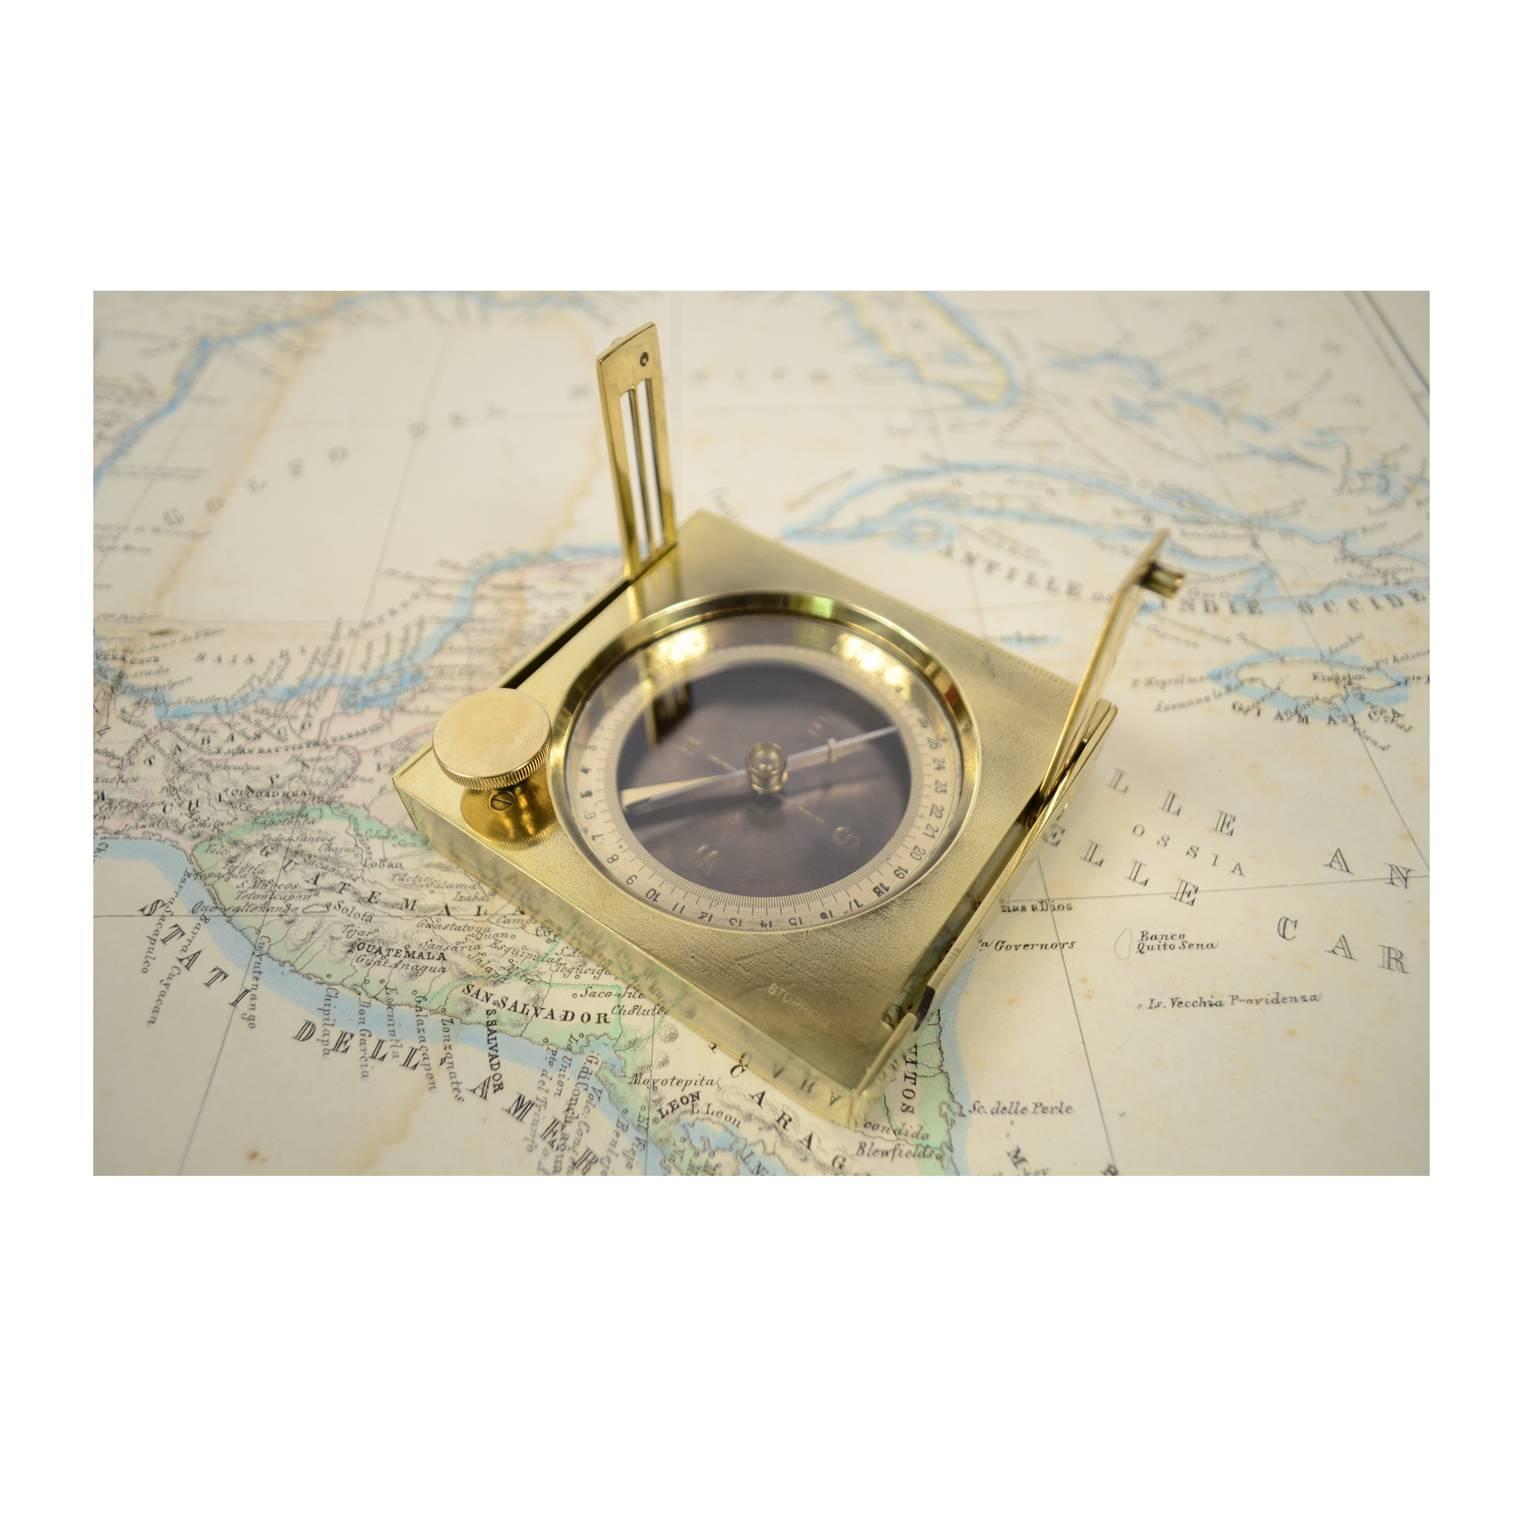 Brass Topographic Compass Placed in Its Original Walnut Box 1